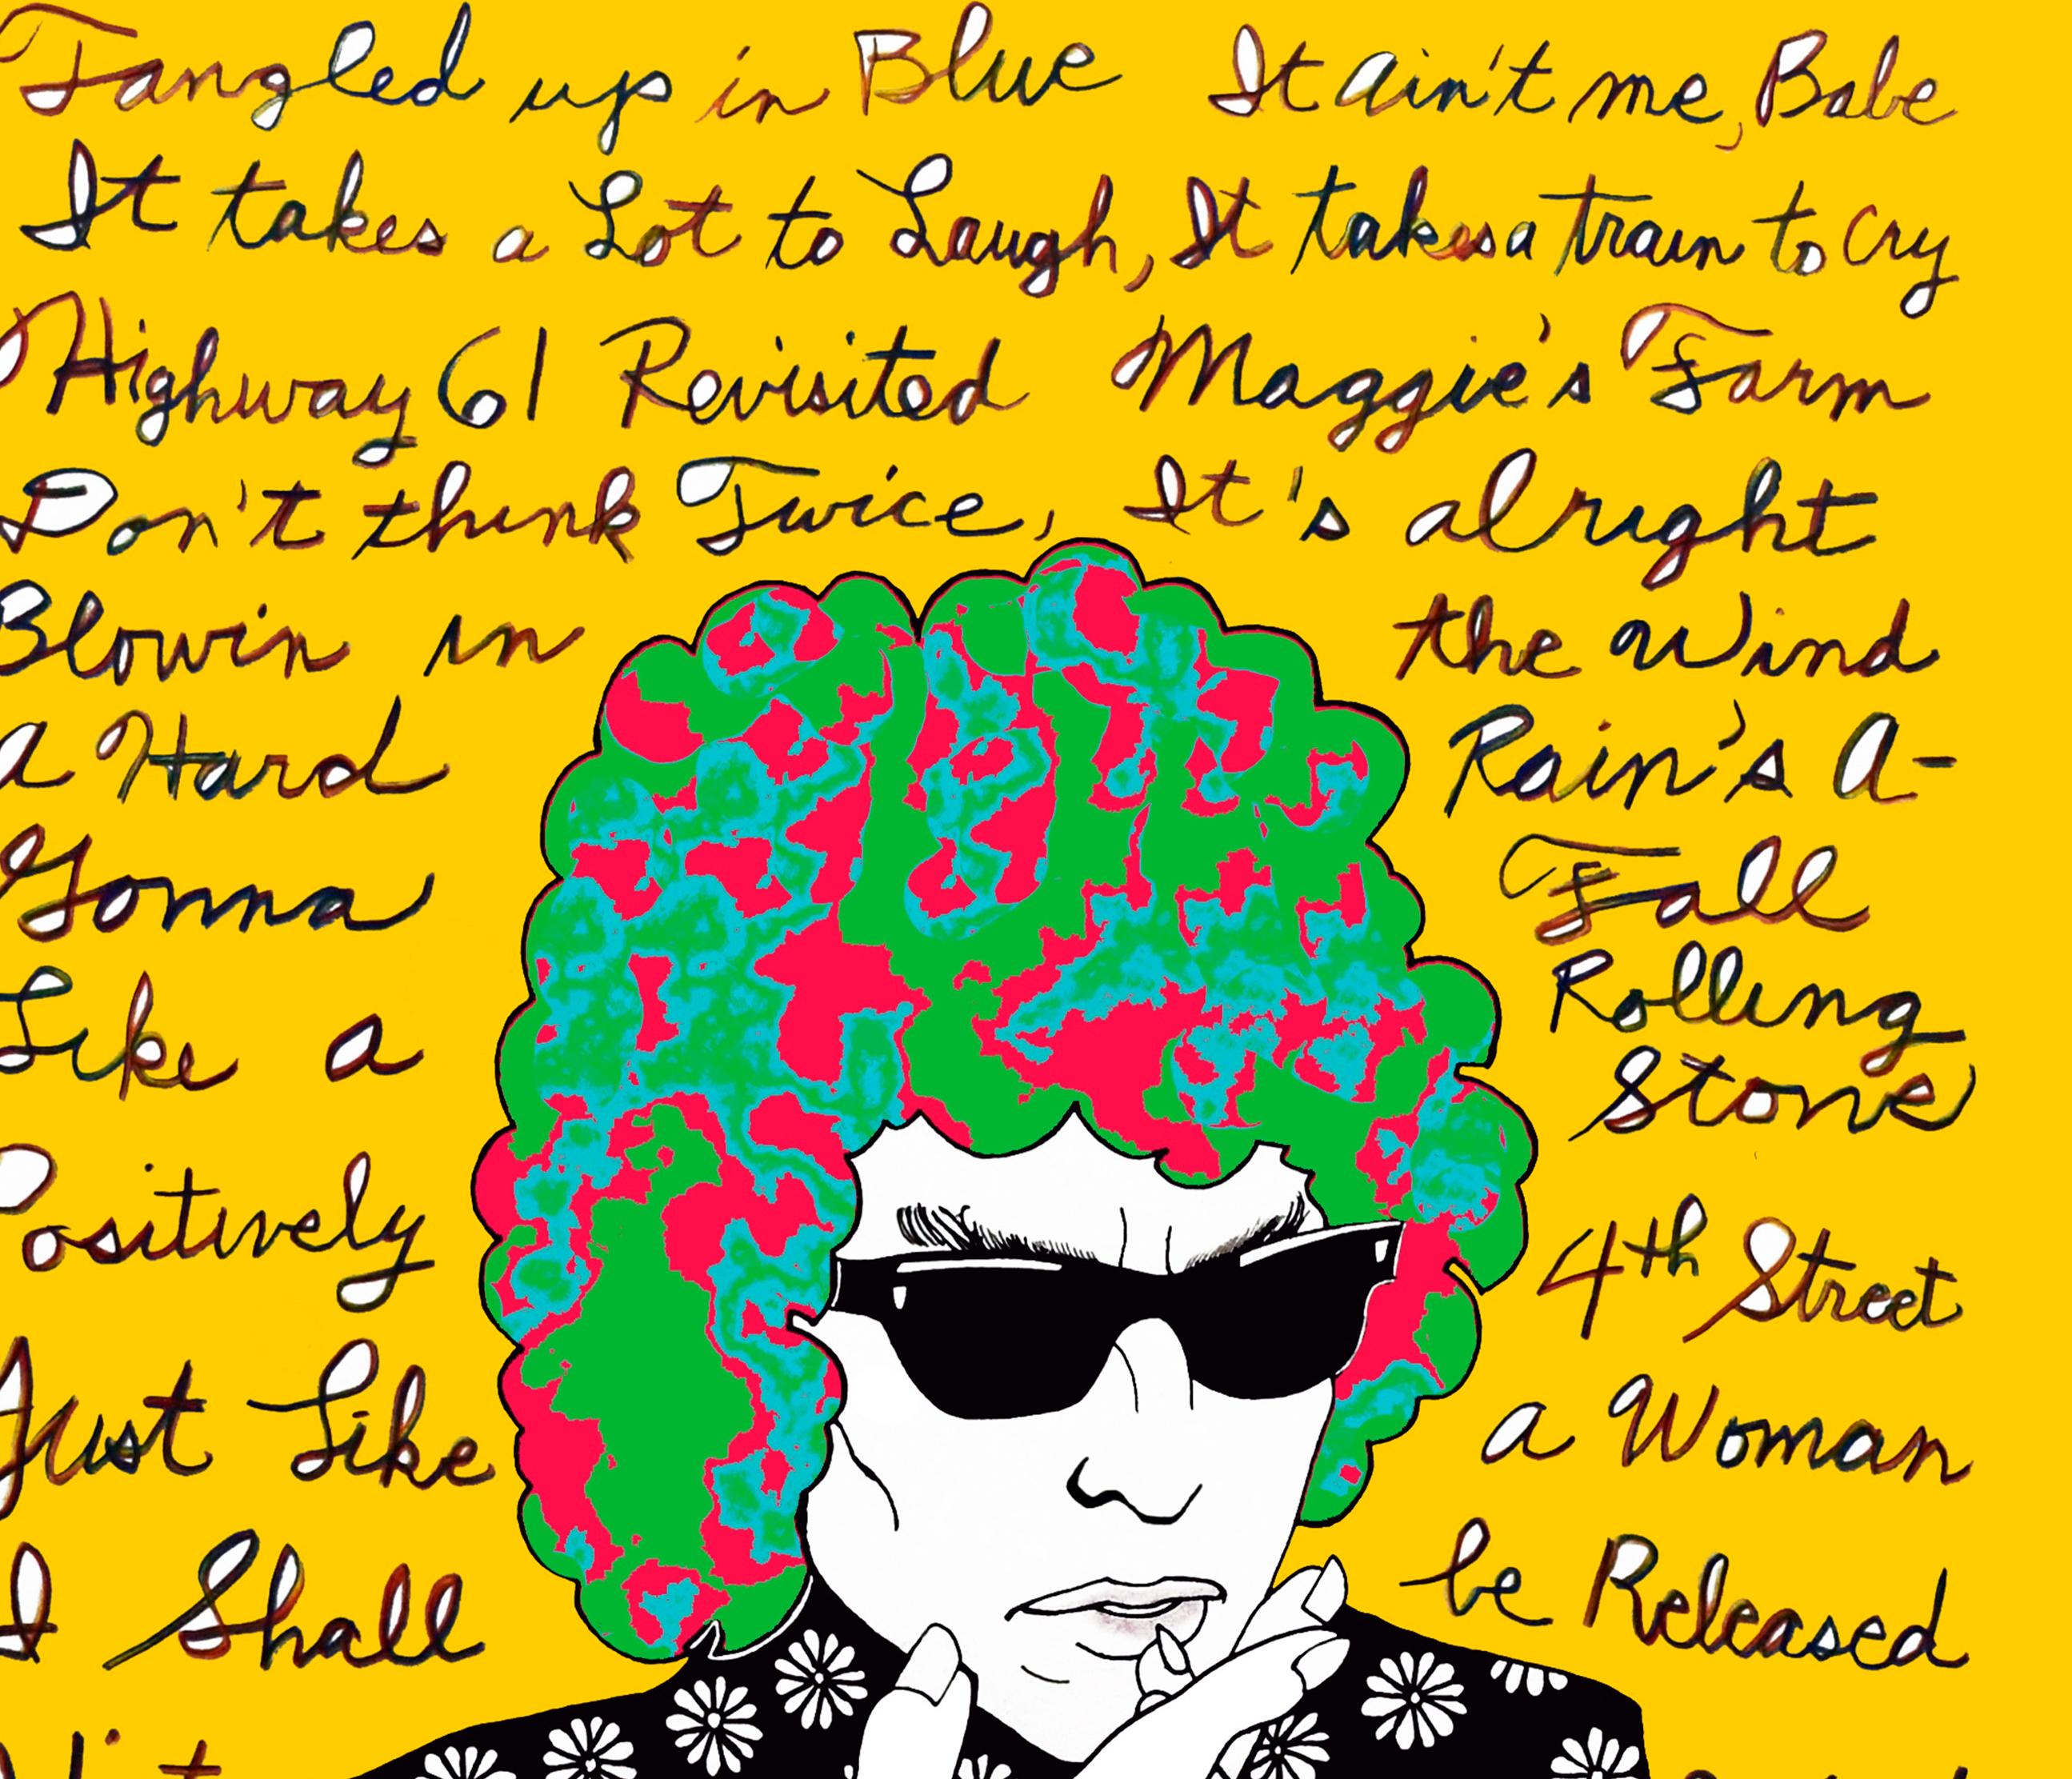 Contemporary Pop Art Screenprint on rice paper, created in 2015.  Artist Zane Fix’s  portrait of Bob Dylan incorporating some of his most iconic song titles.  All prints are in edition, signed, numbered and dated, in pencil, by the artist.

Ink on